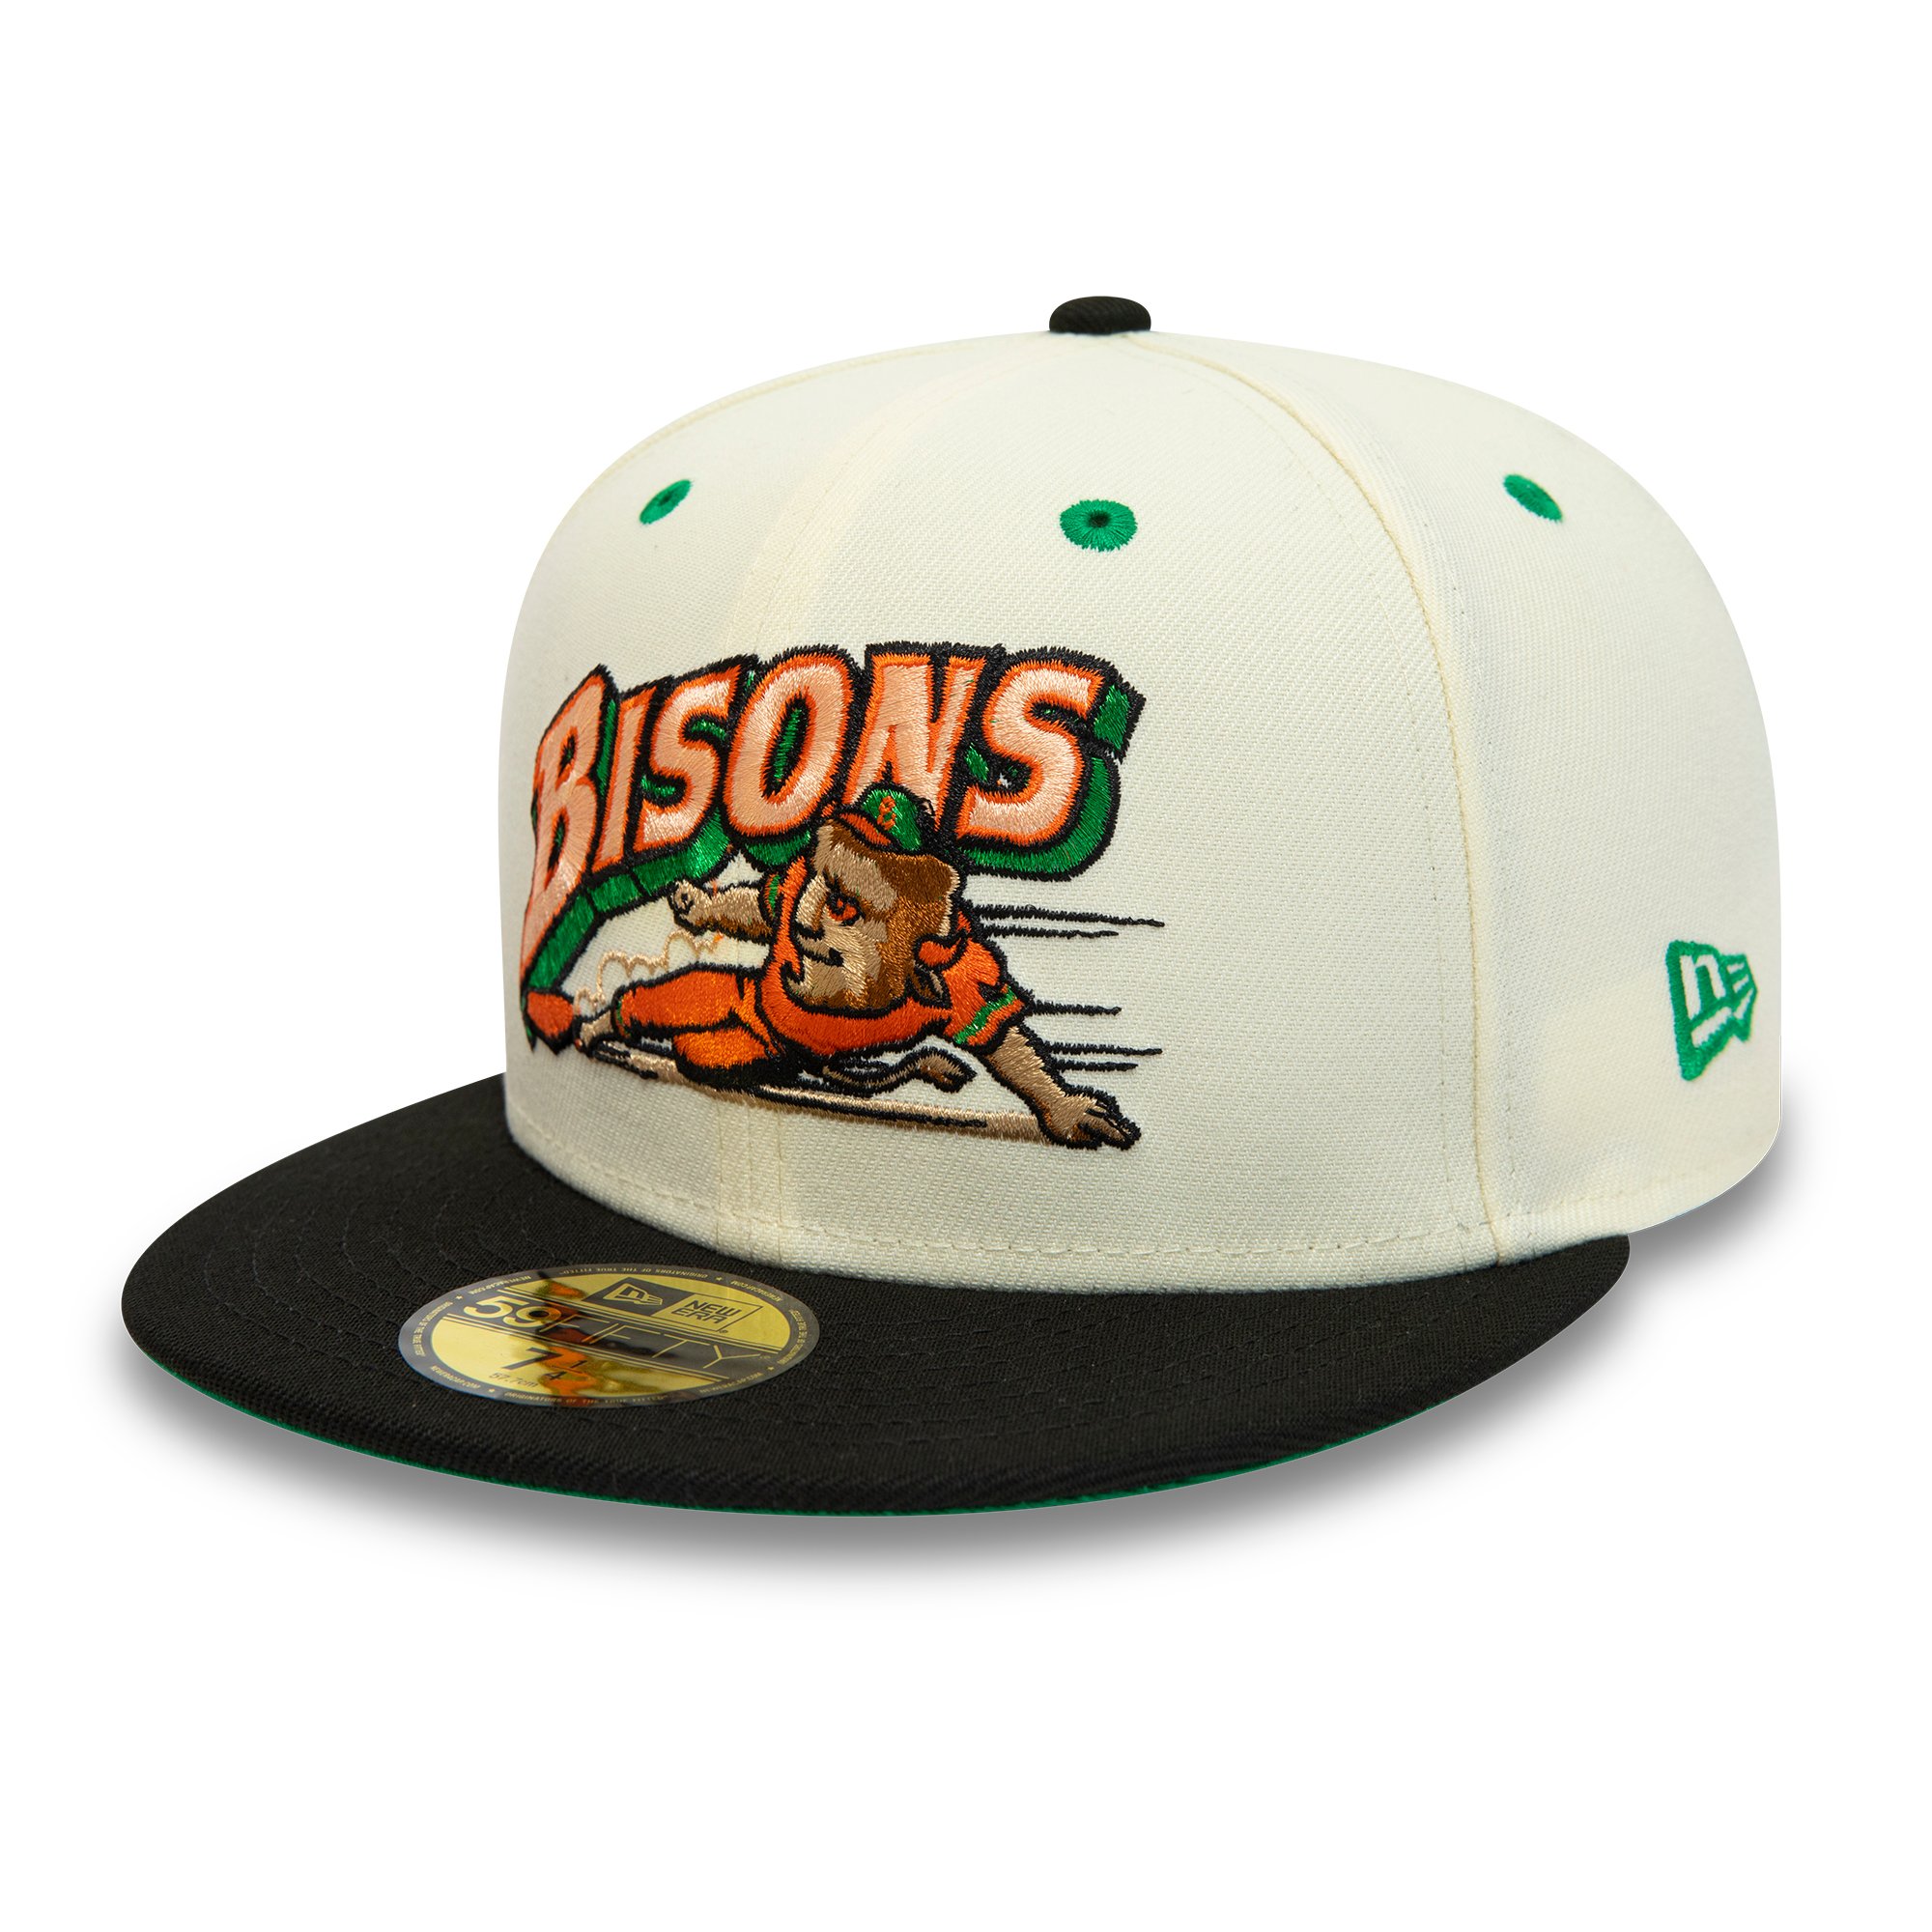 Buffalo Bisons MiLB Chrome White 59FIFTY Fitted Cap